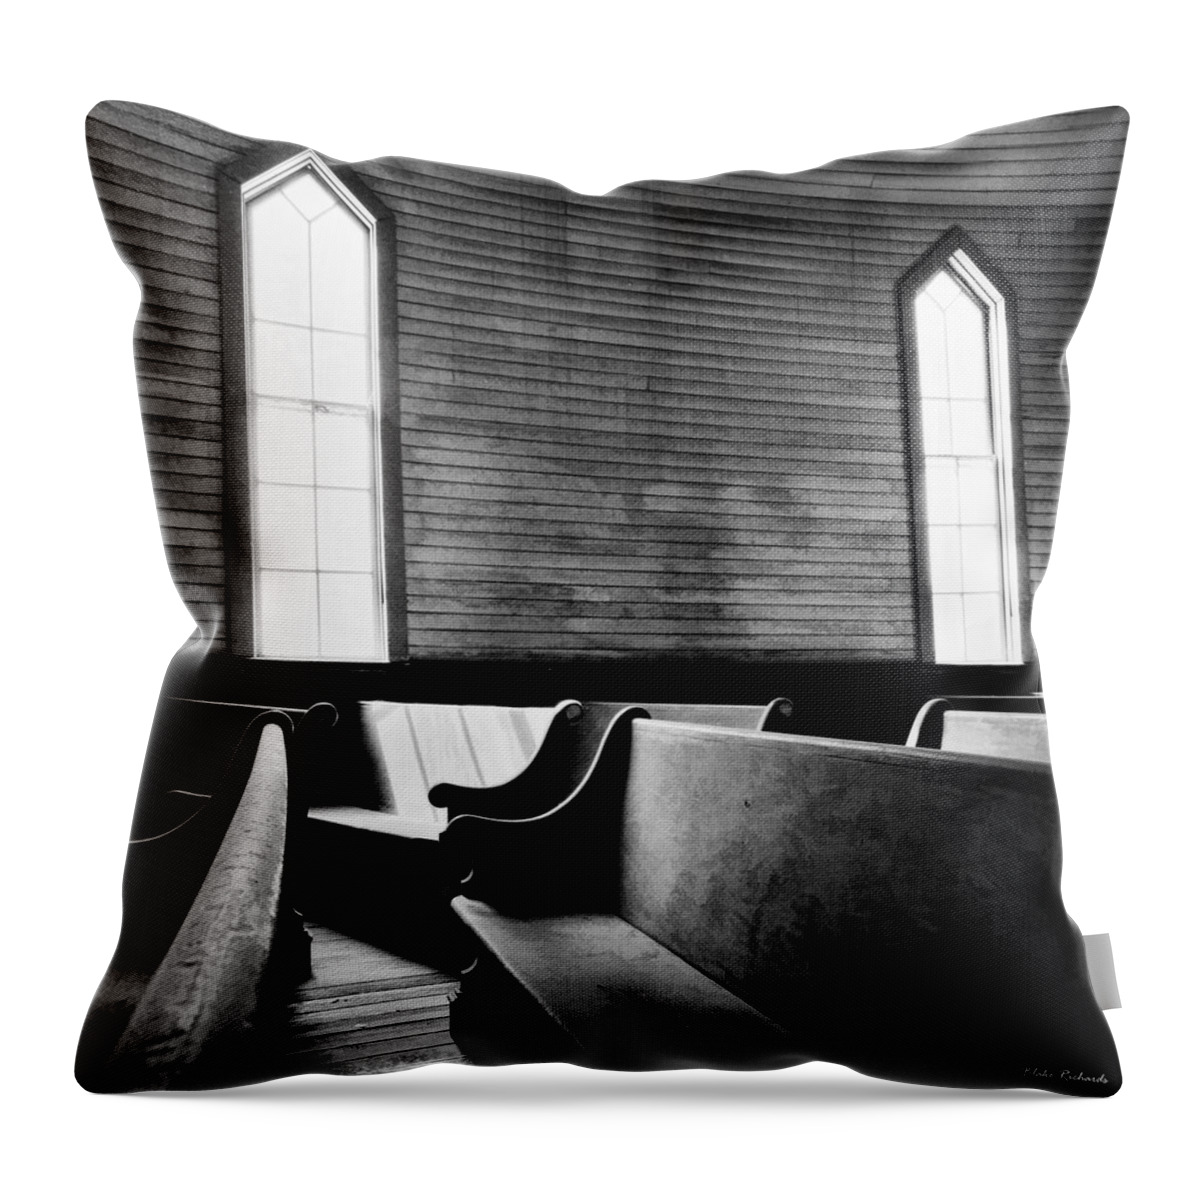  Throw Pillow featuring the photograph Two Window Church by Blake Richards